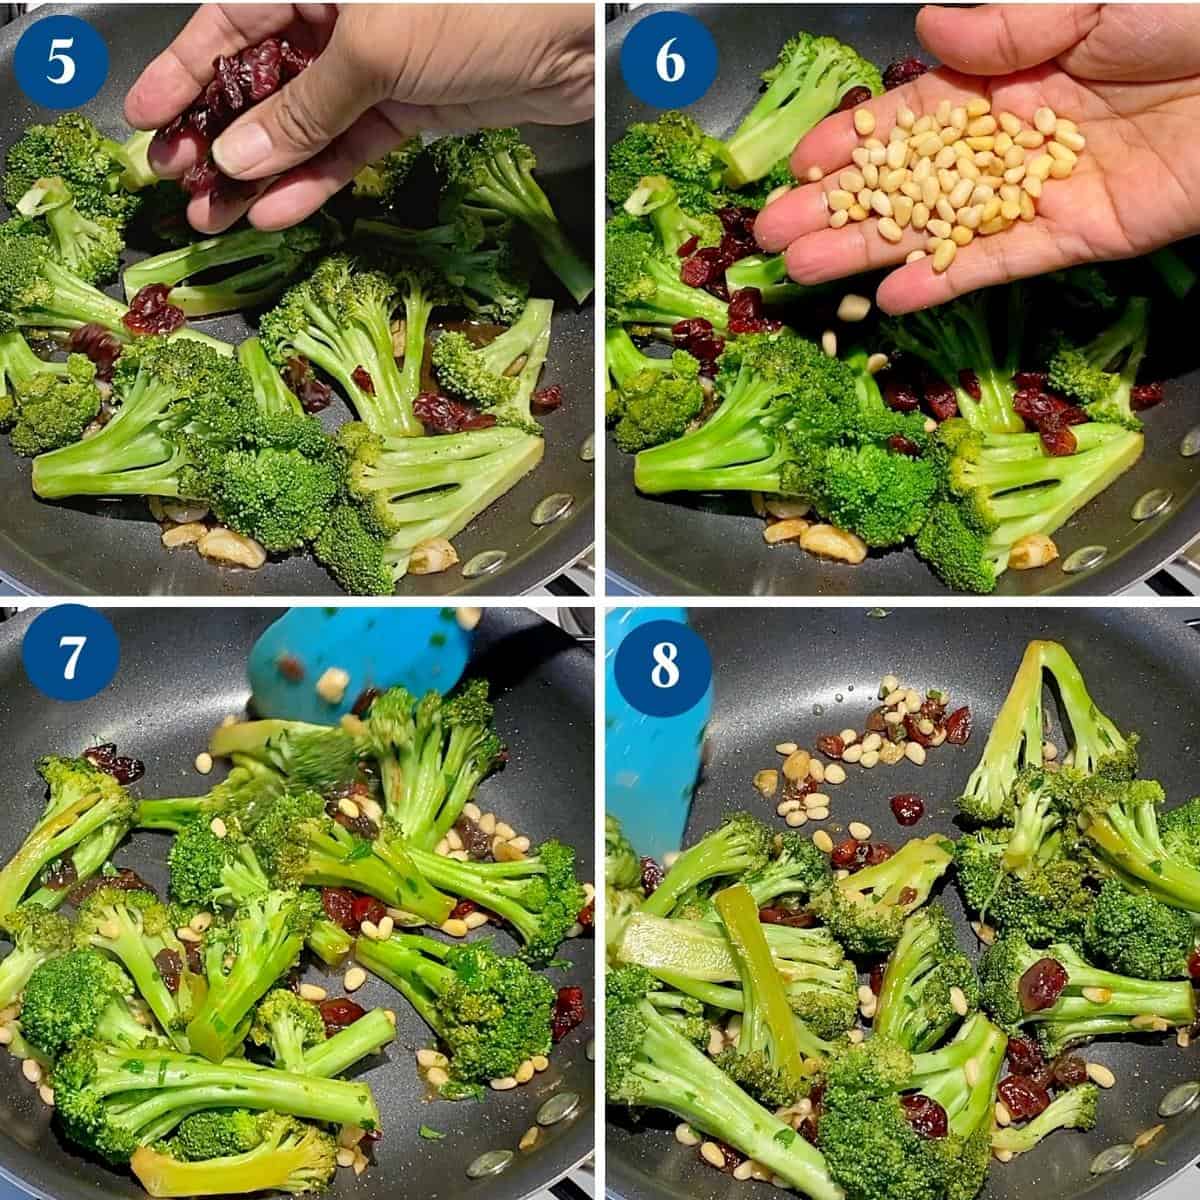 Progress pictures for broccoli sautéed with cranberries.